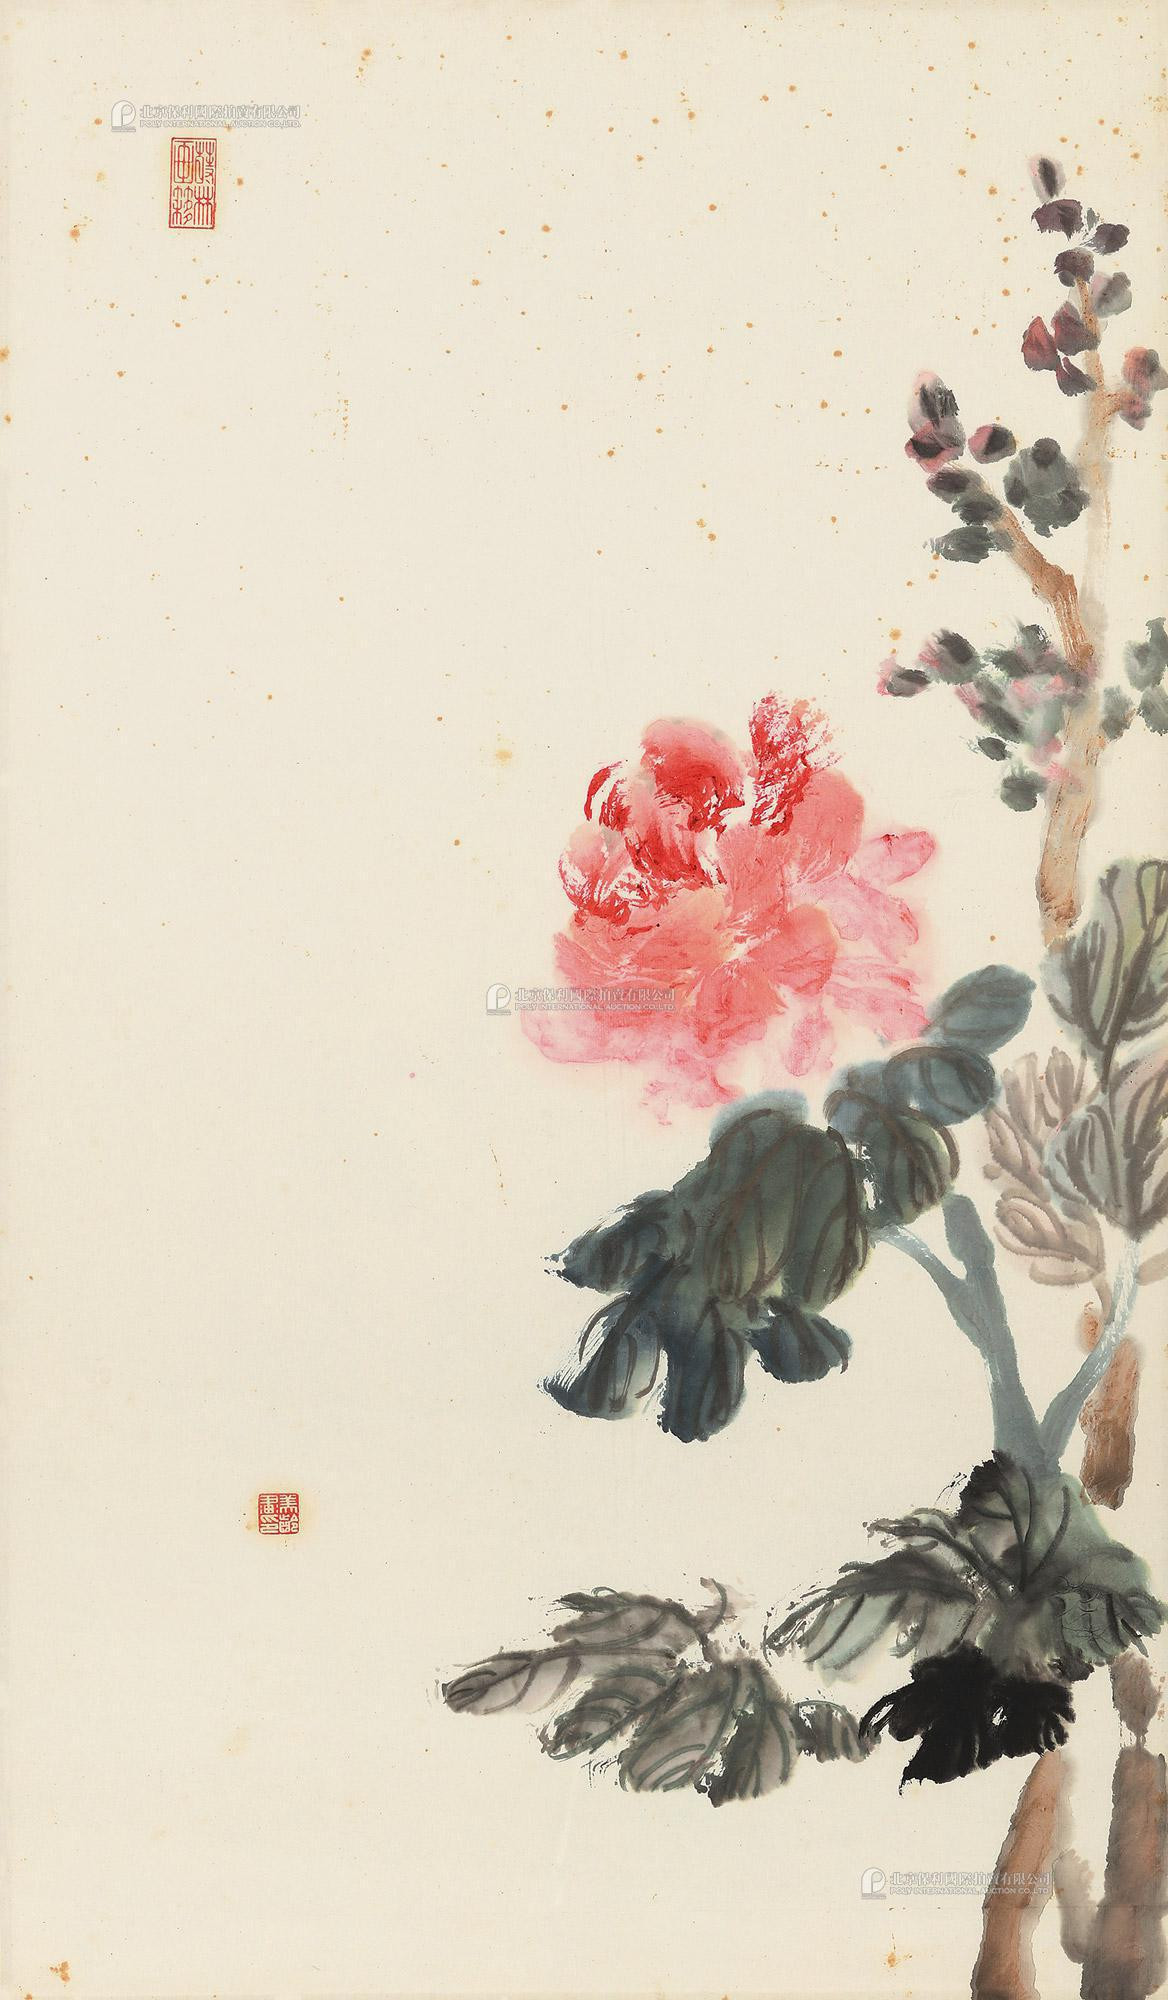 “Flowers” painted by Song Meiling